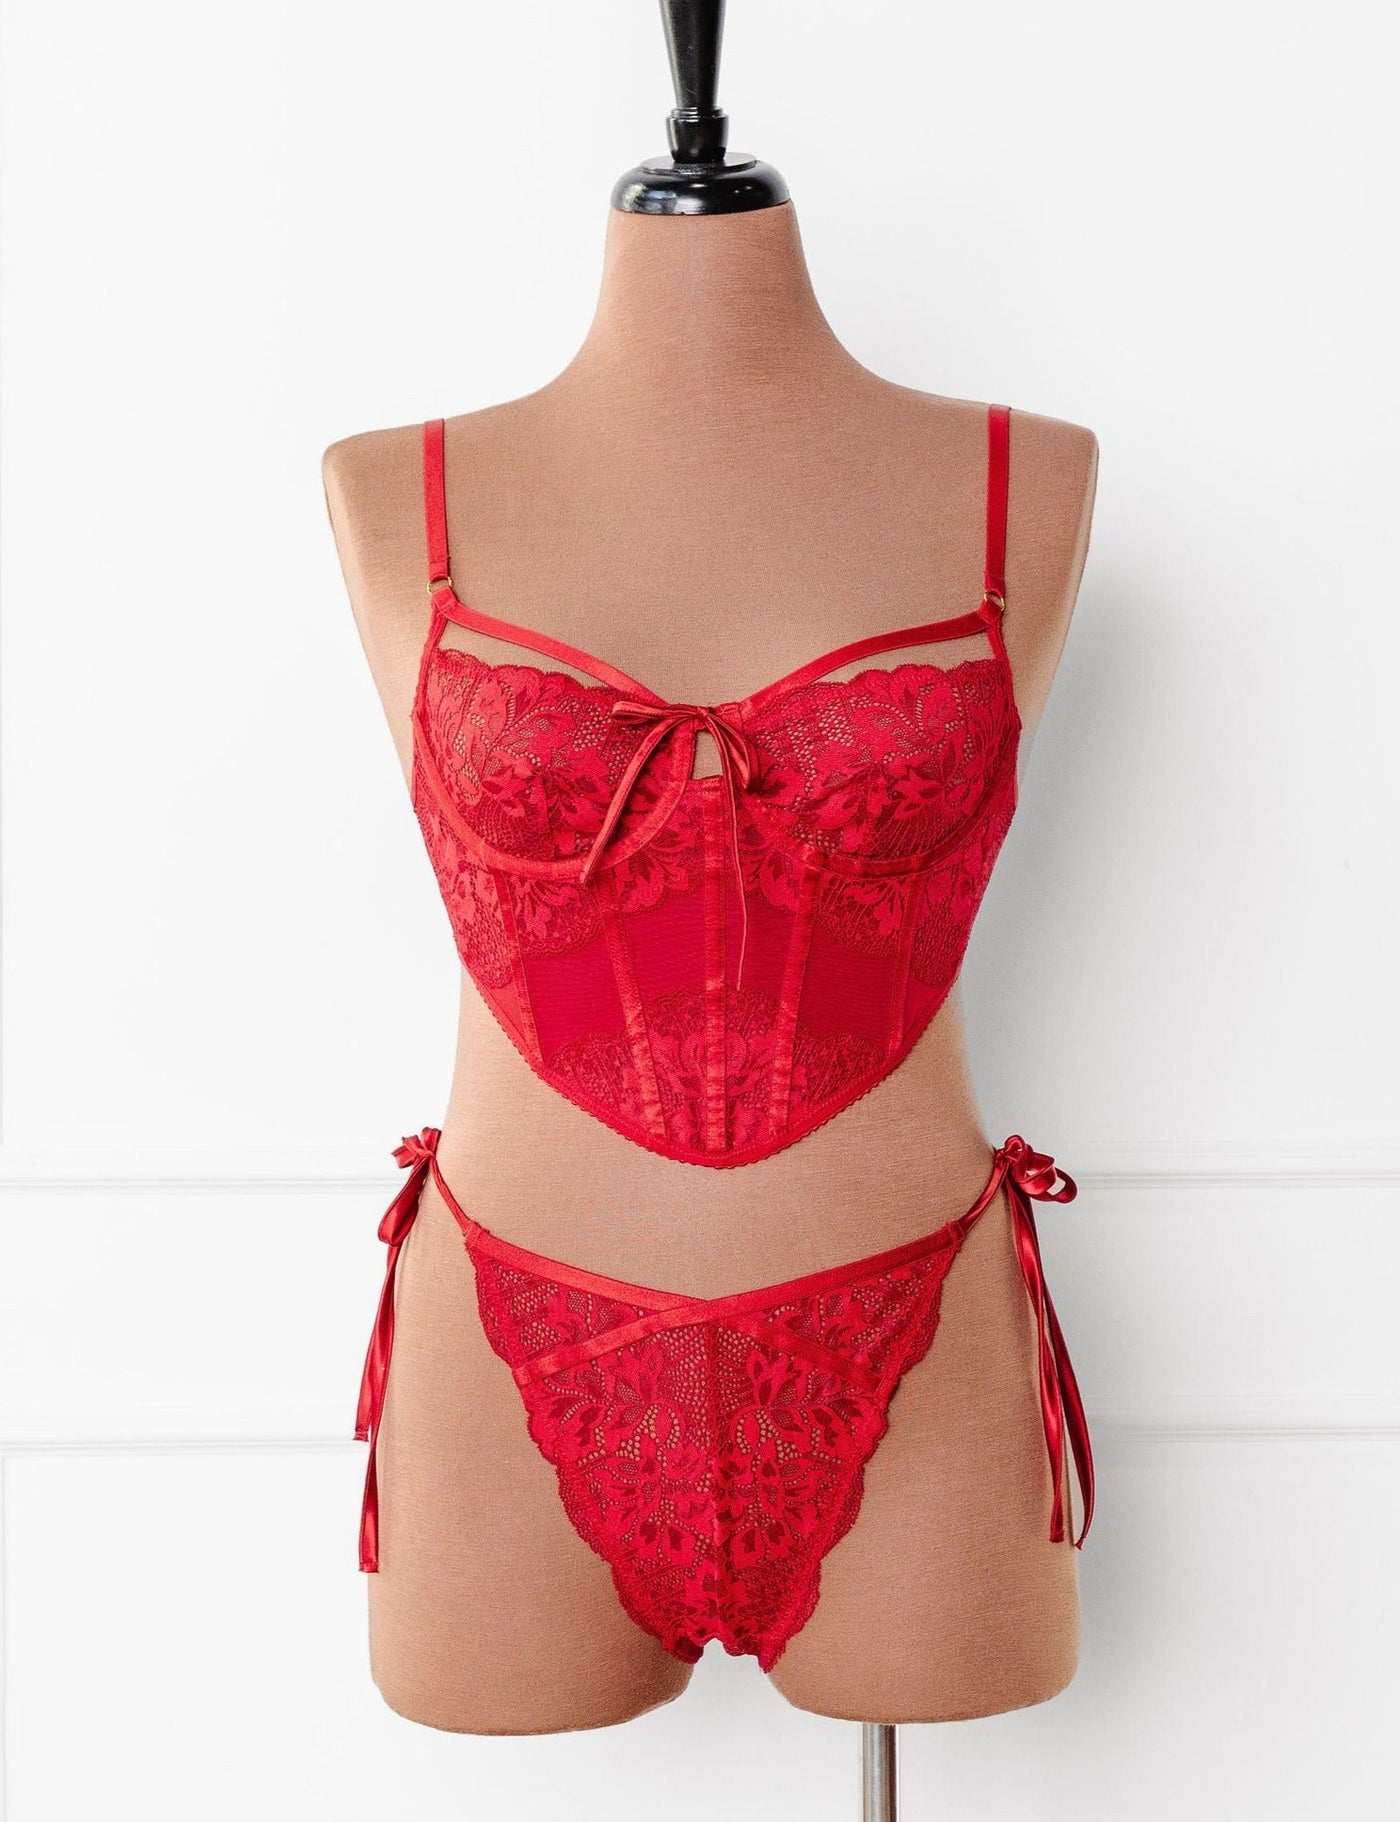 Lacy Underwire Corset - Red - Mentionables